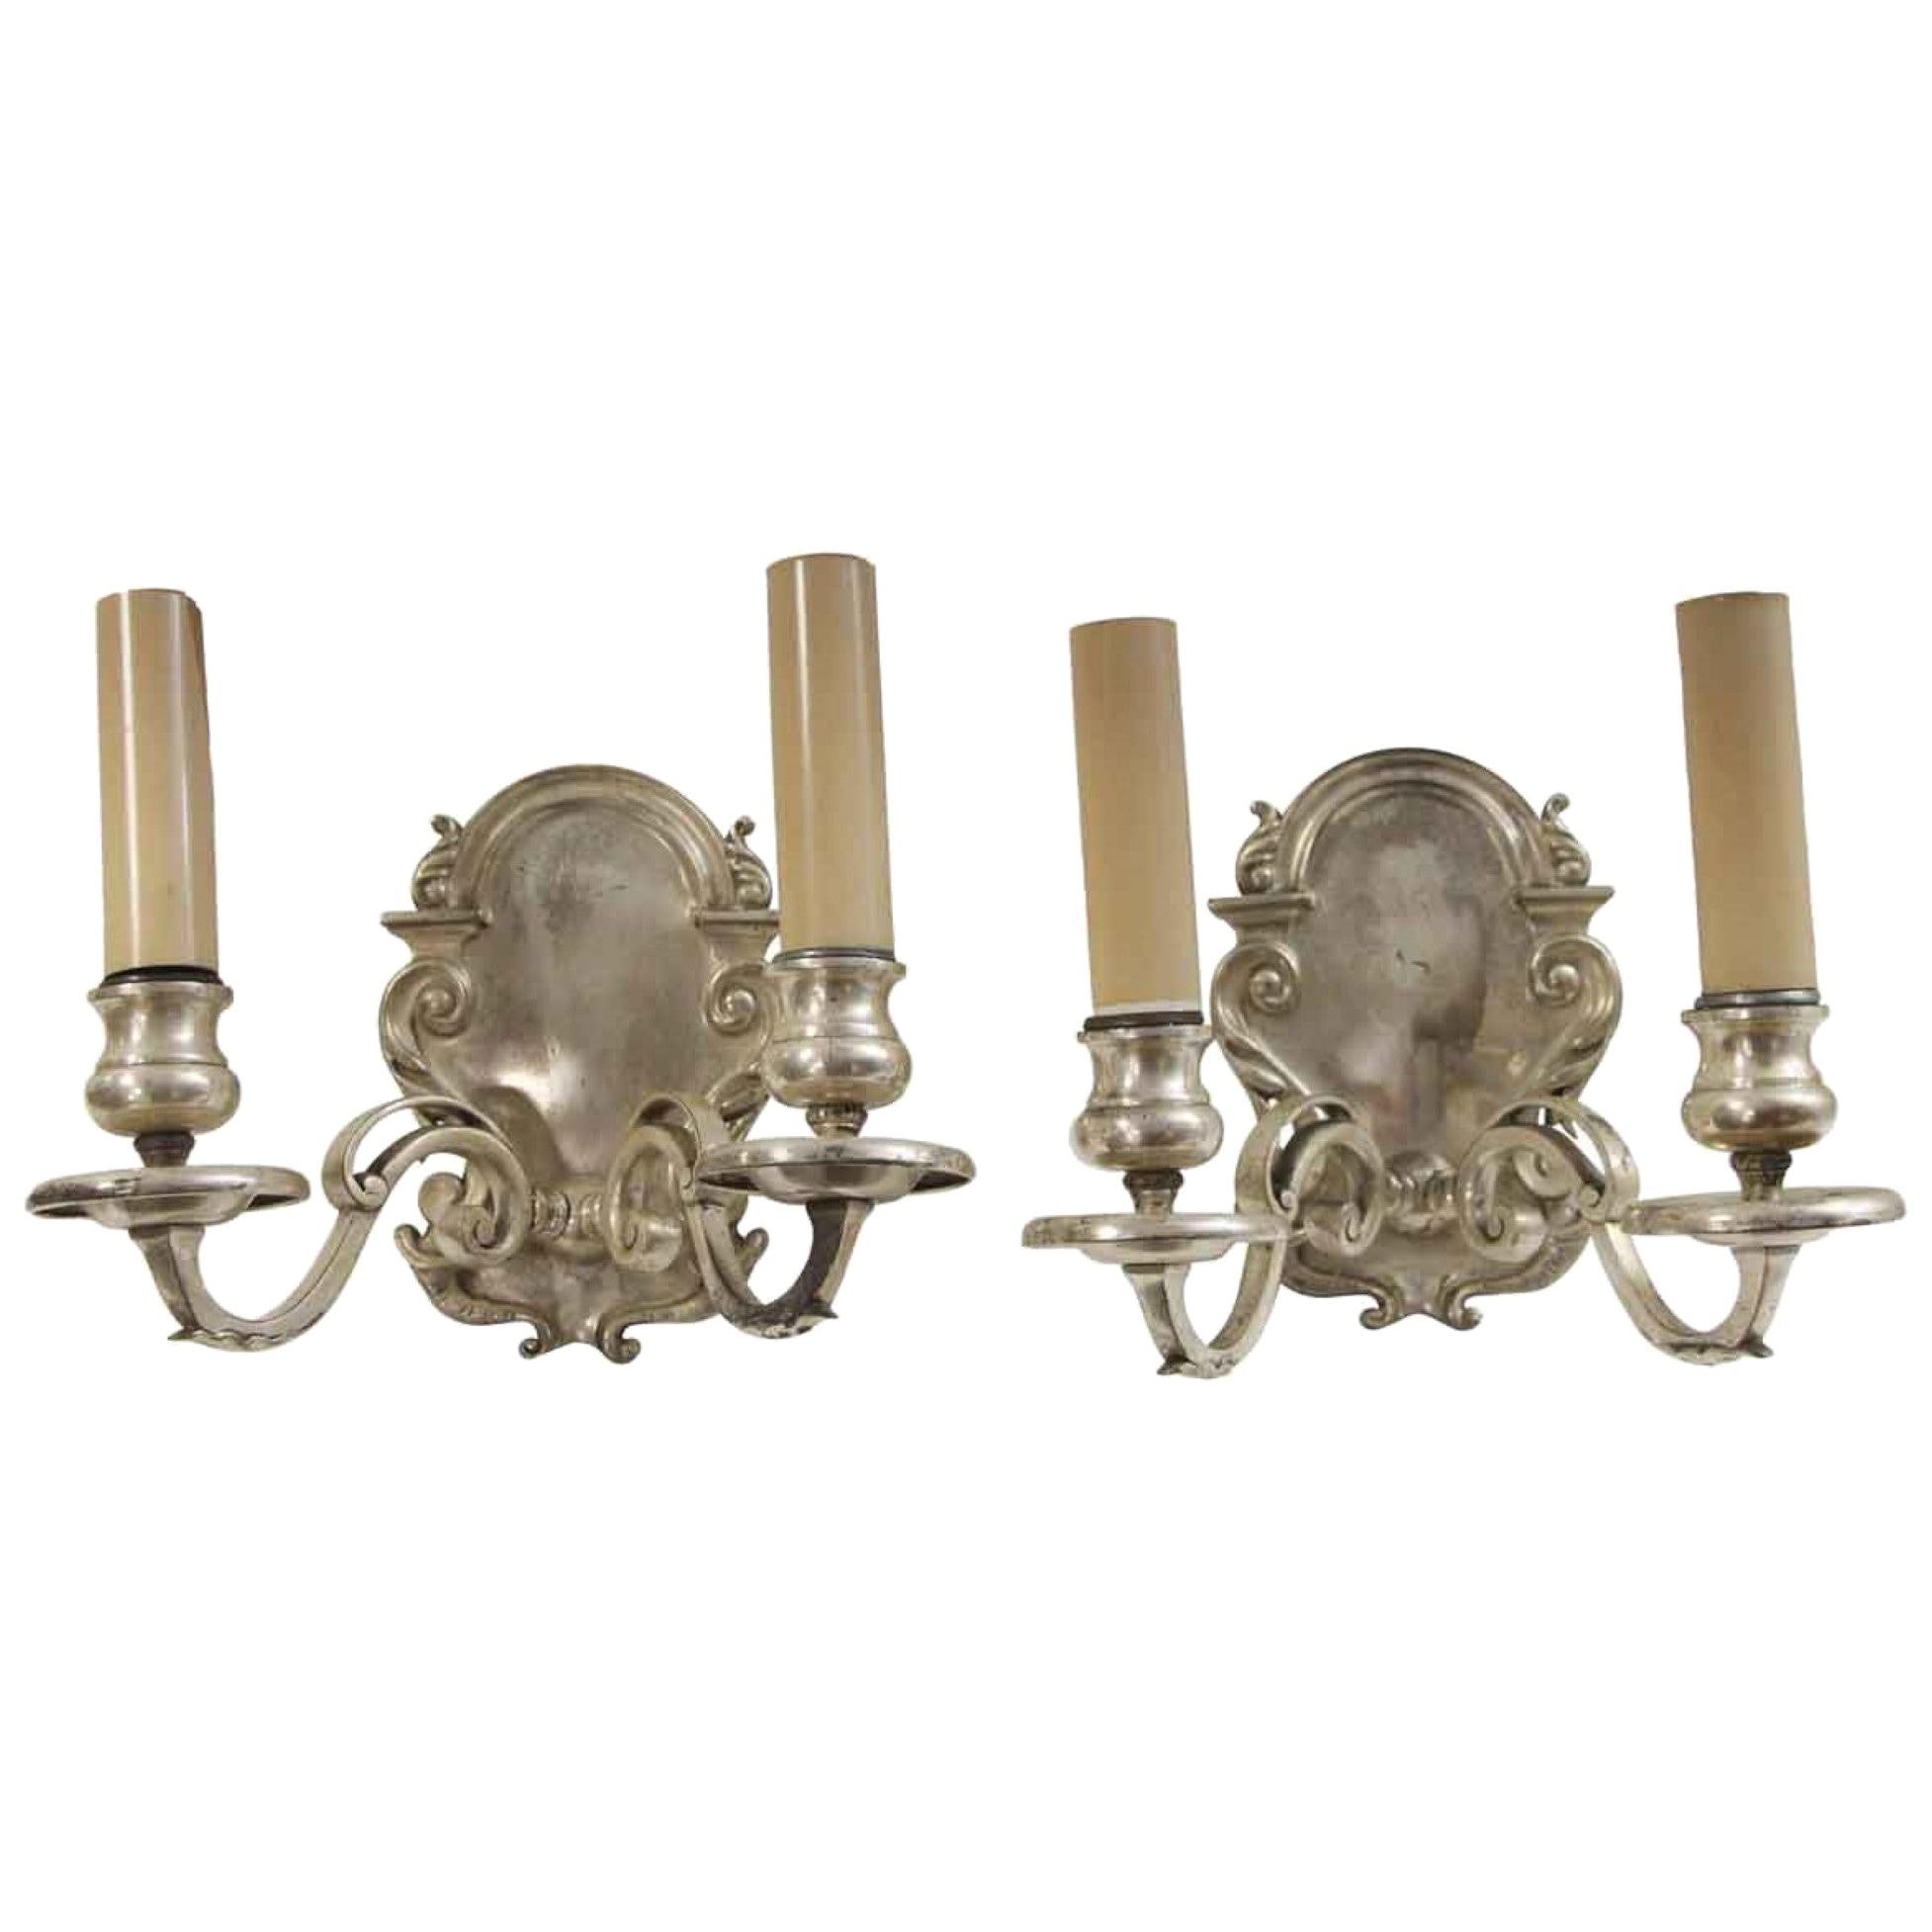 1920s Pair of Traditional Silver Plated Brass Sconces, Quantity Available